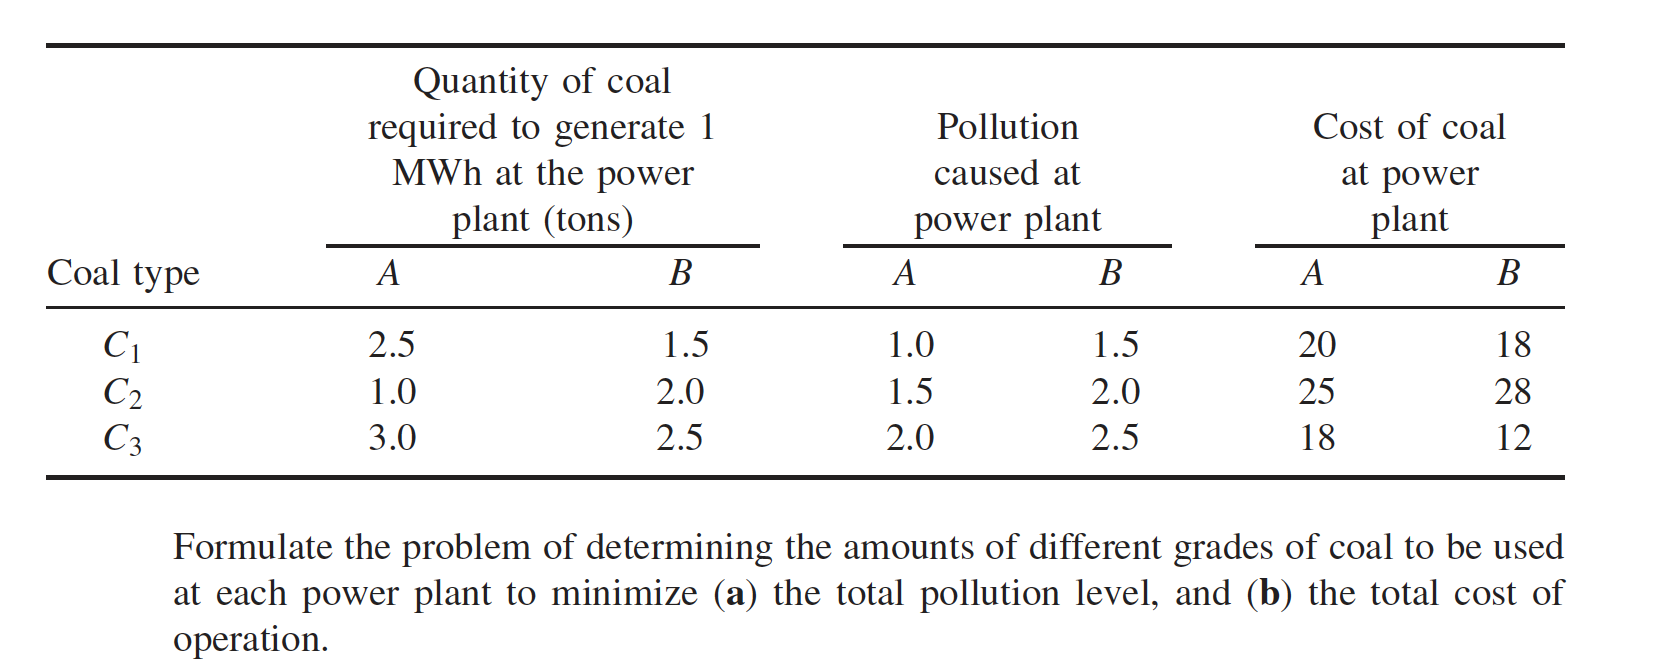 Quantity of coal required to generate 1 MWh at the power plant (tons) A ? Pollution caused at power plant A B Cost of coal at